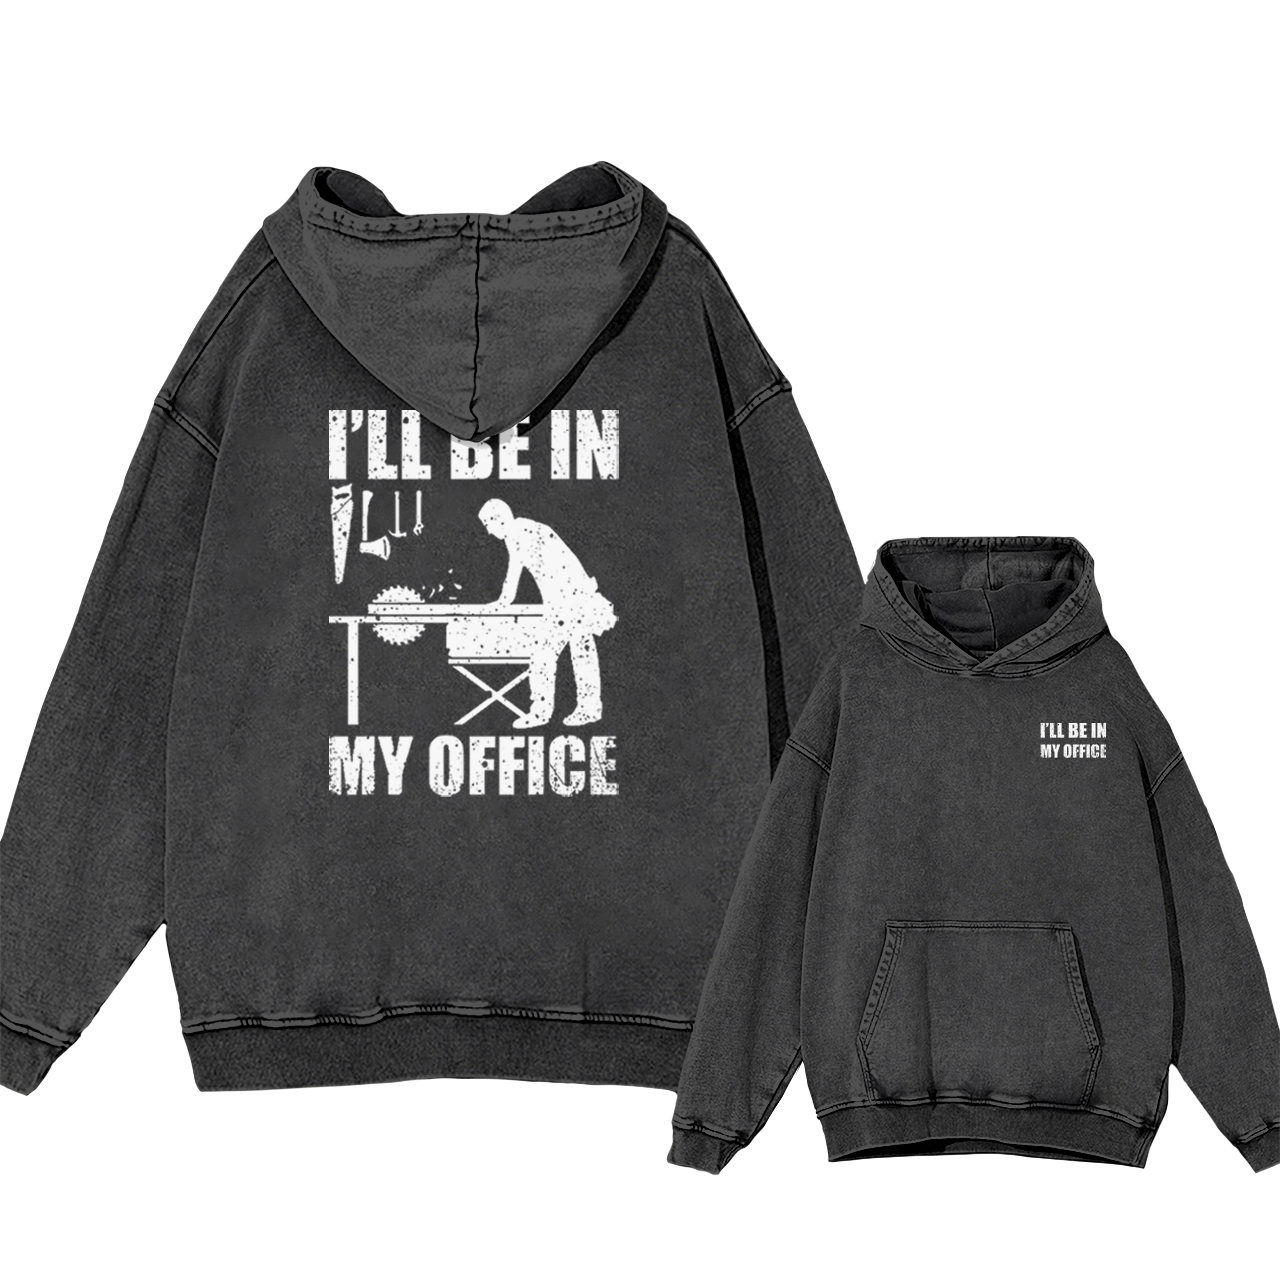 I'll Be In My Office Funny Woodworking Garment-Dye Hoodies